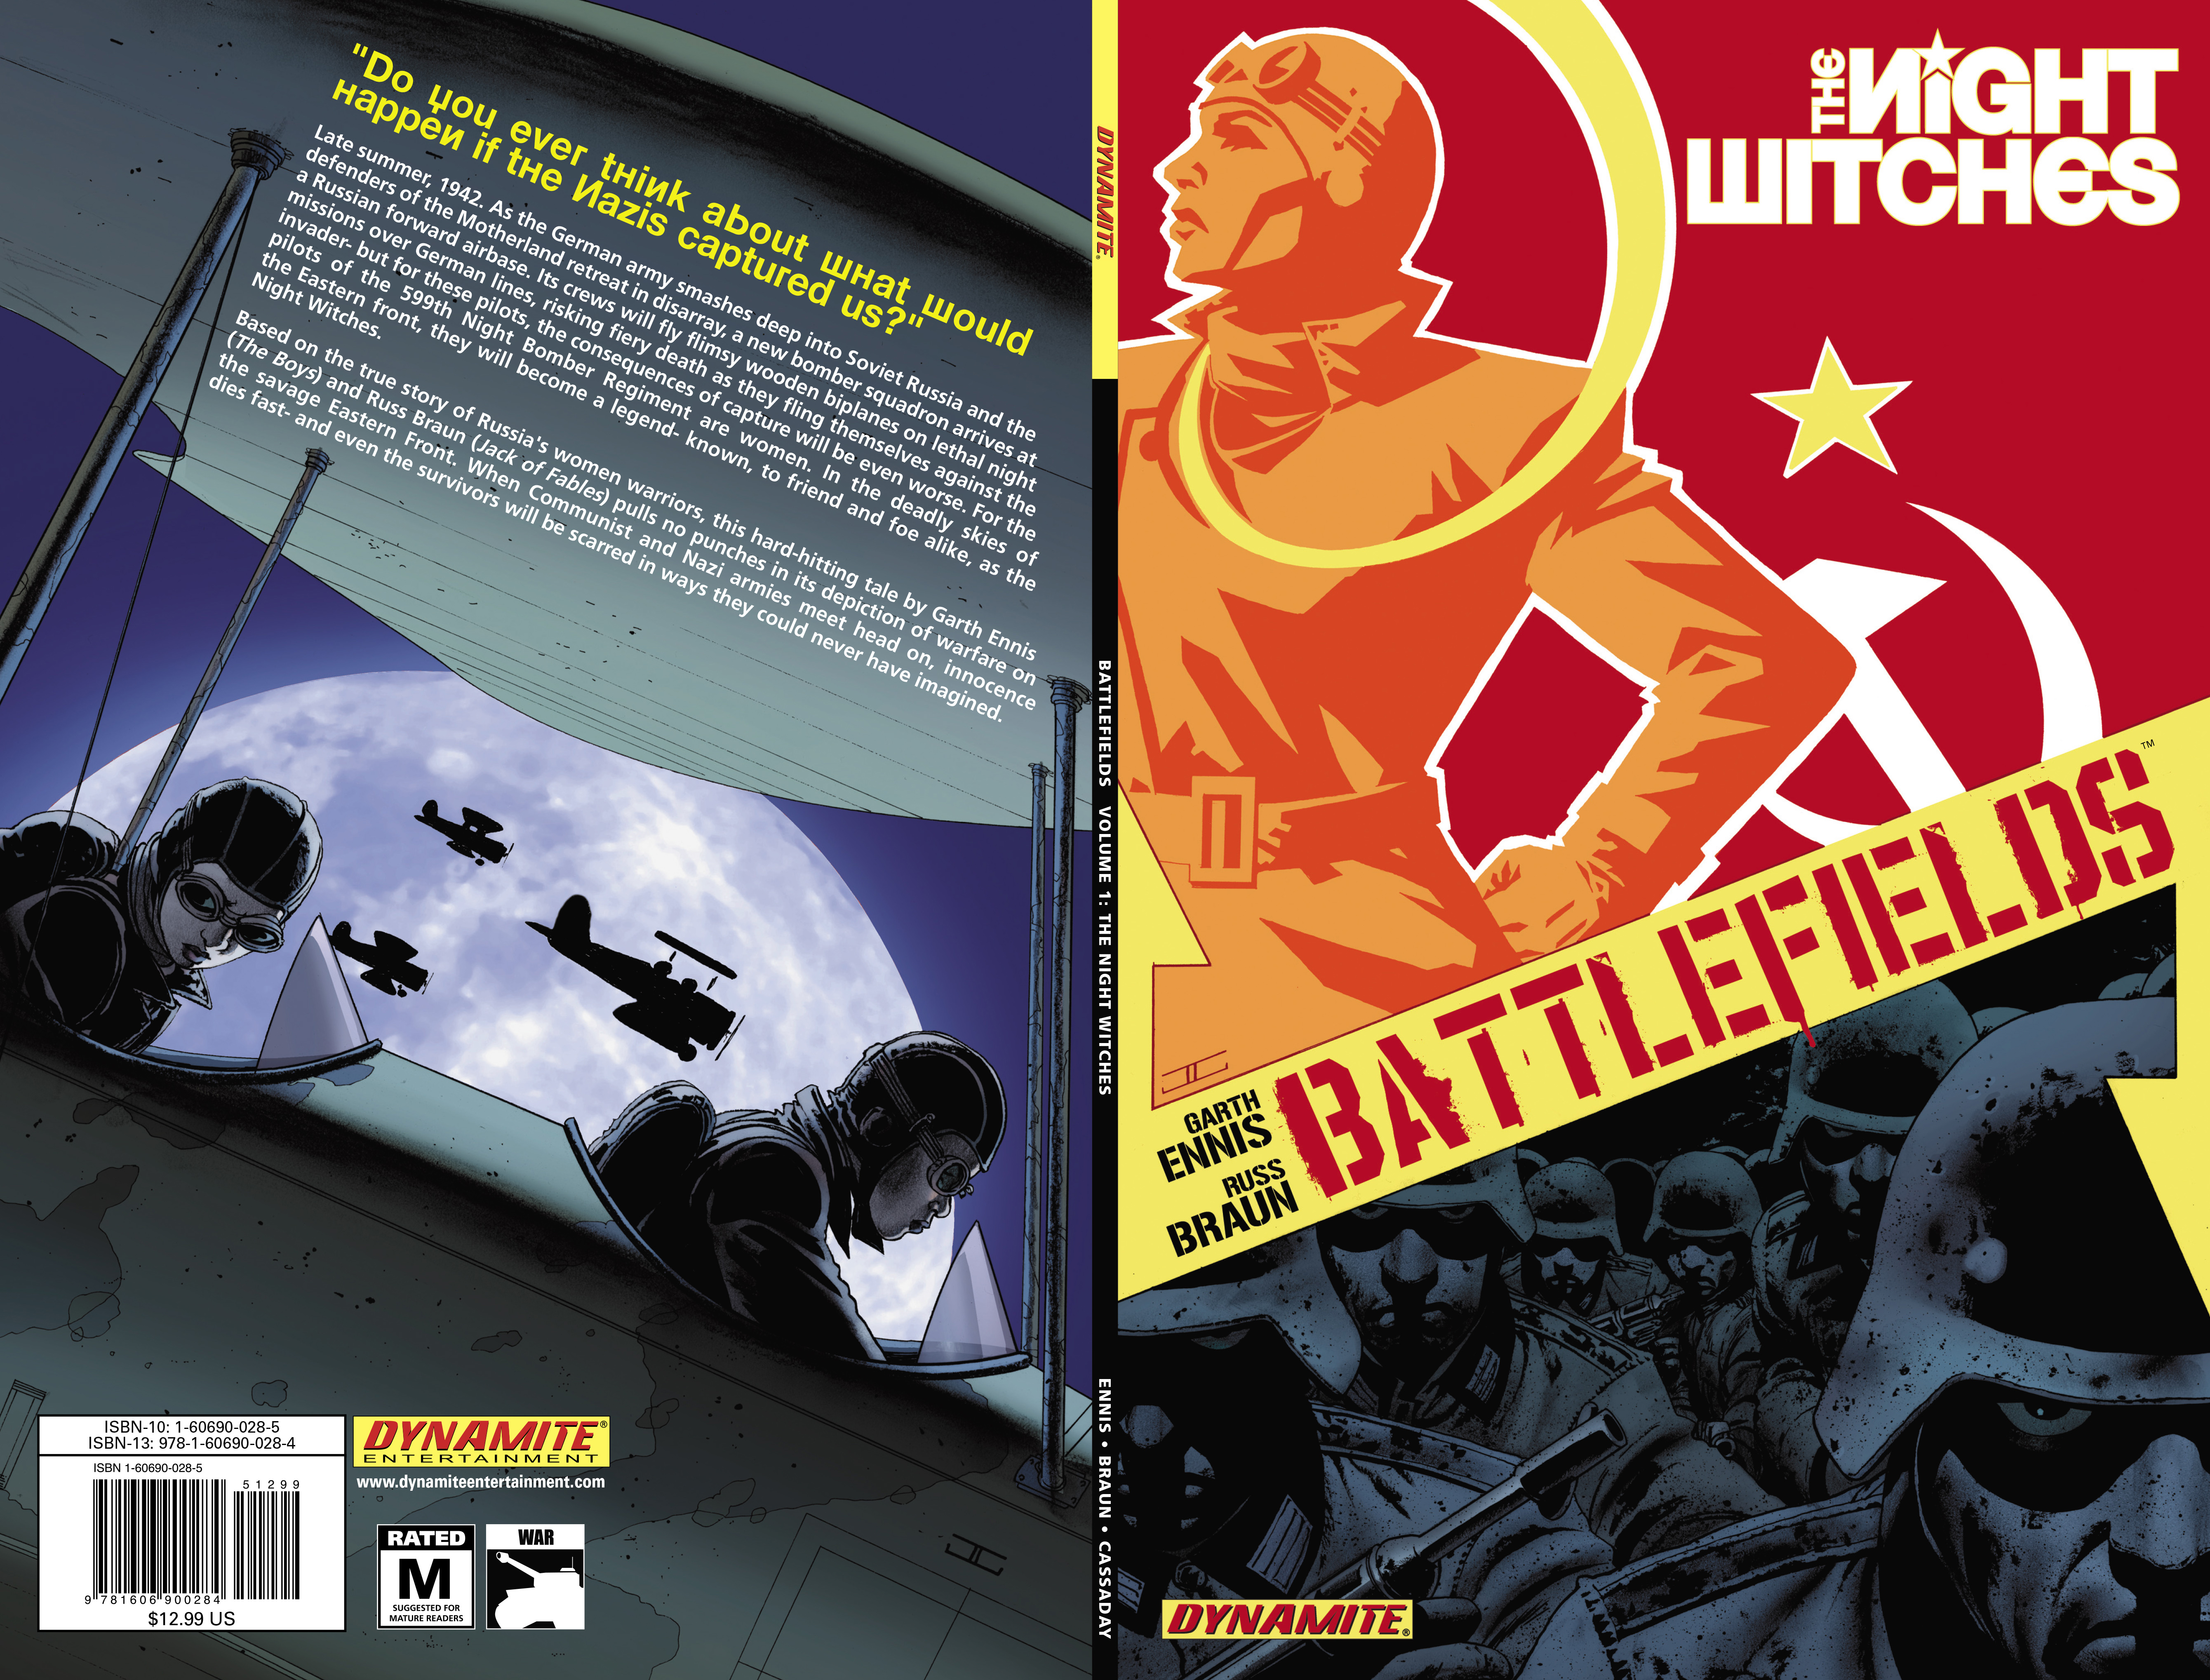 Read online Battlefields: The Night Witches comic -  Issue # TPB - 1